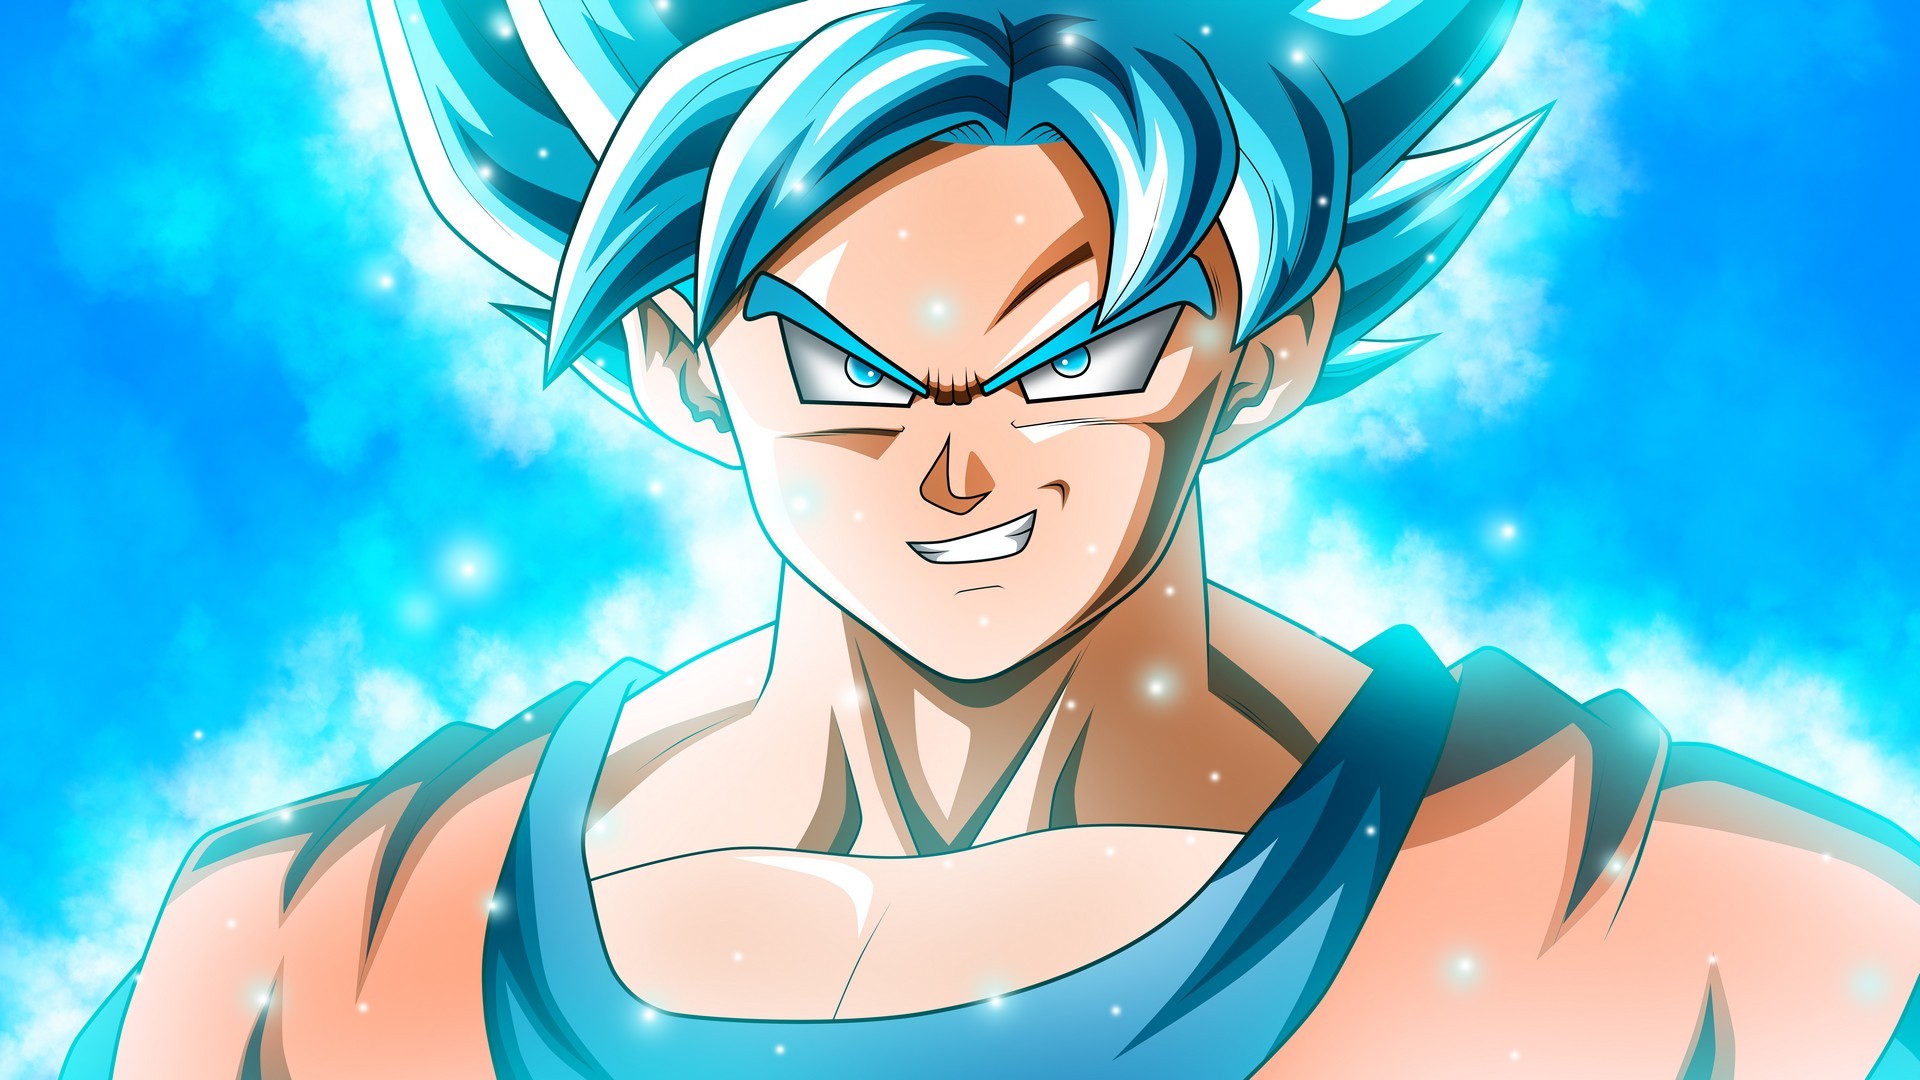 Goku SSJ Blue Background Wallpaper HD With Resolution 1920X1080 pixel. You can make this wallpaper for your Desktop Computer Backgrounds, Mac Wallpapers, Android Lock screen or iPhone Screensavers